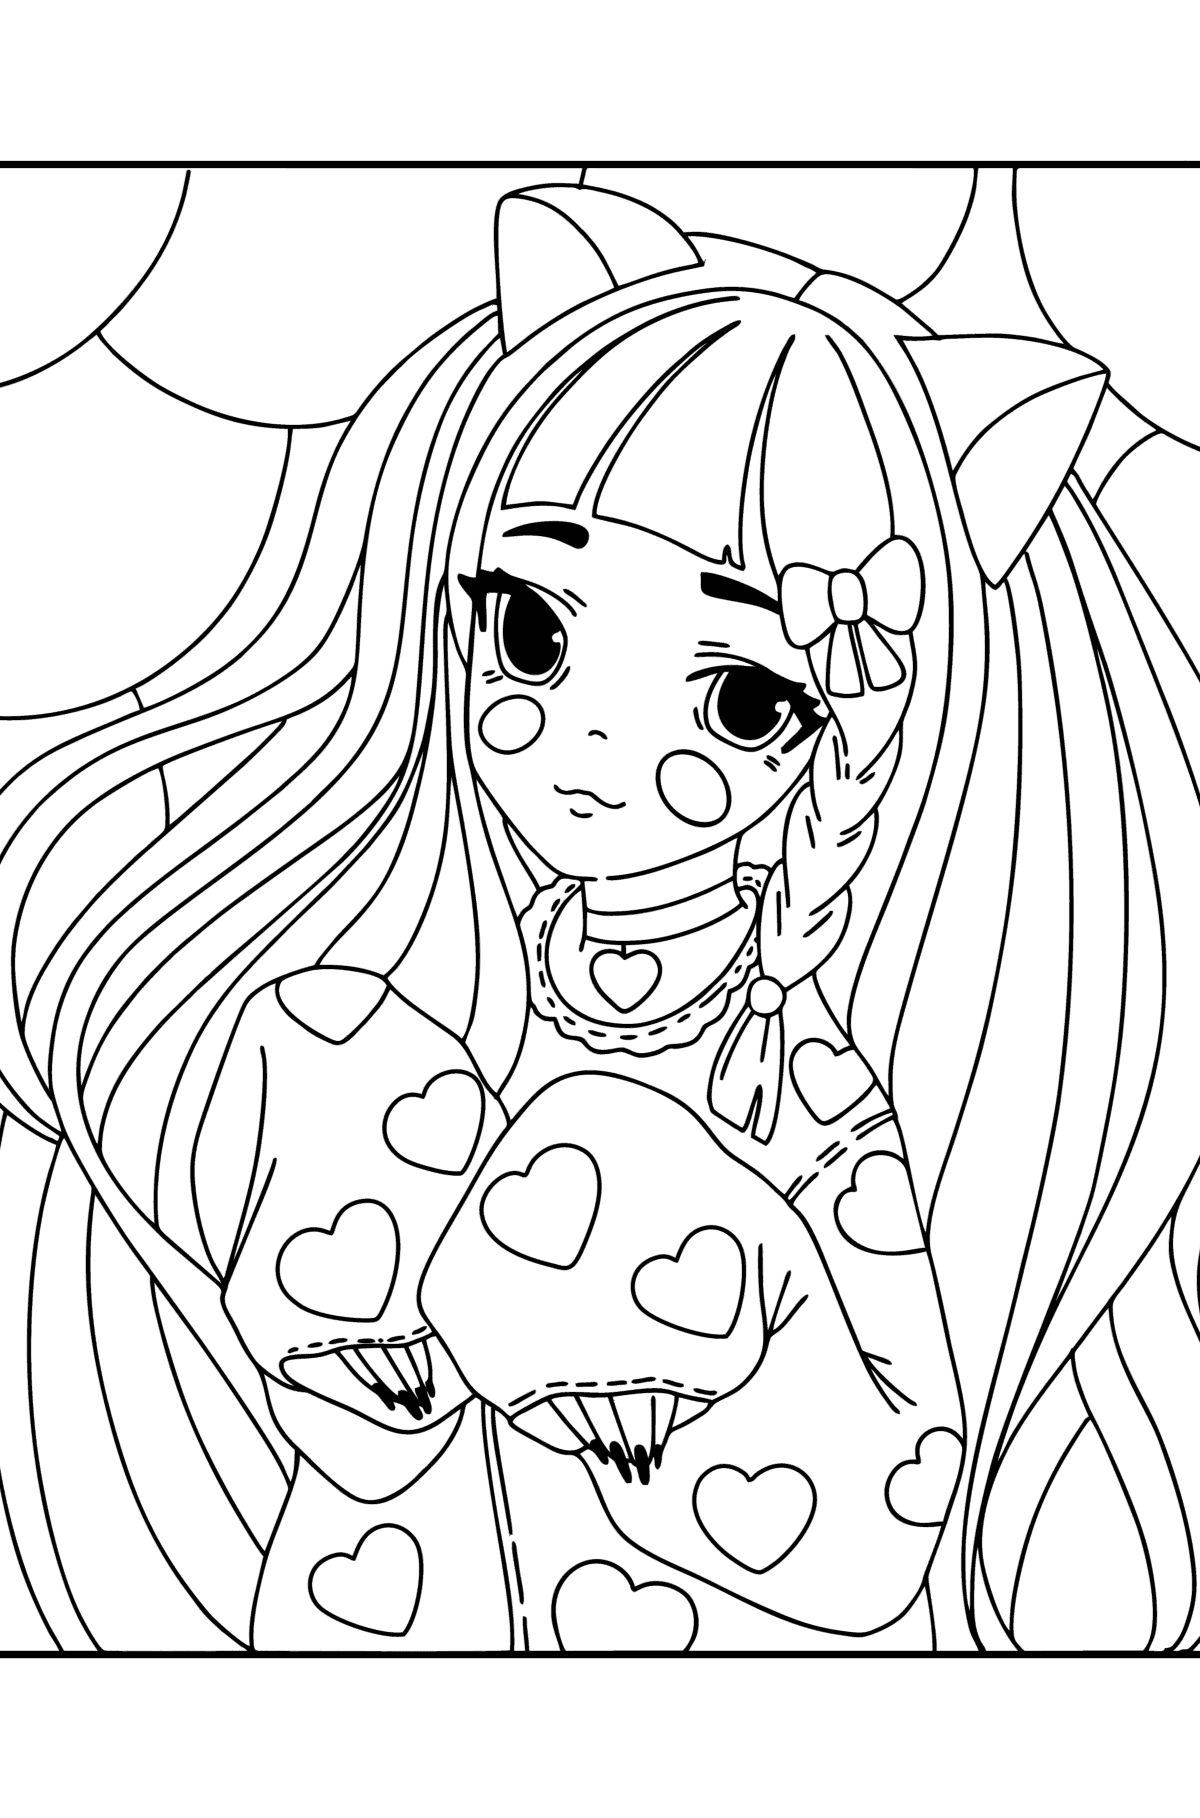 Anime girl with ears and paws coloring page - Coloring Pages for Kids